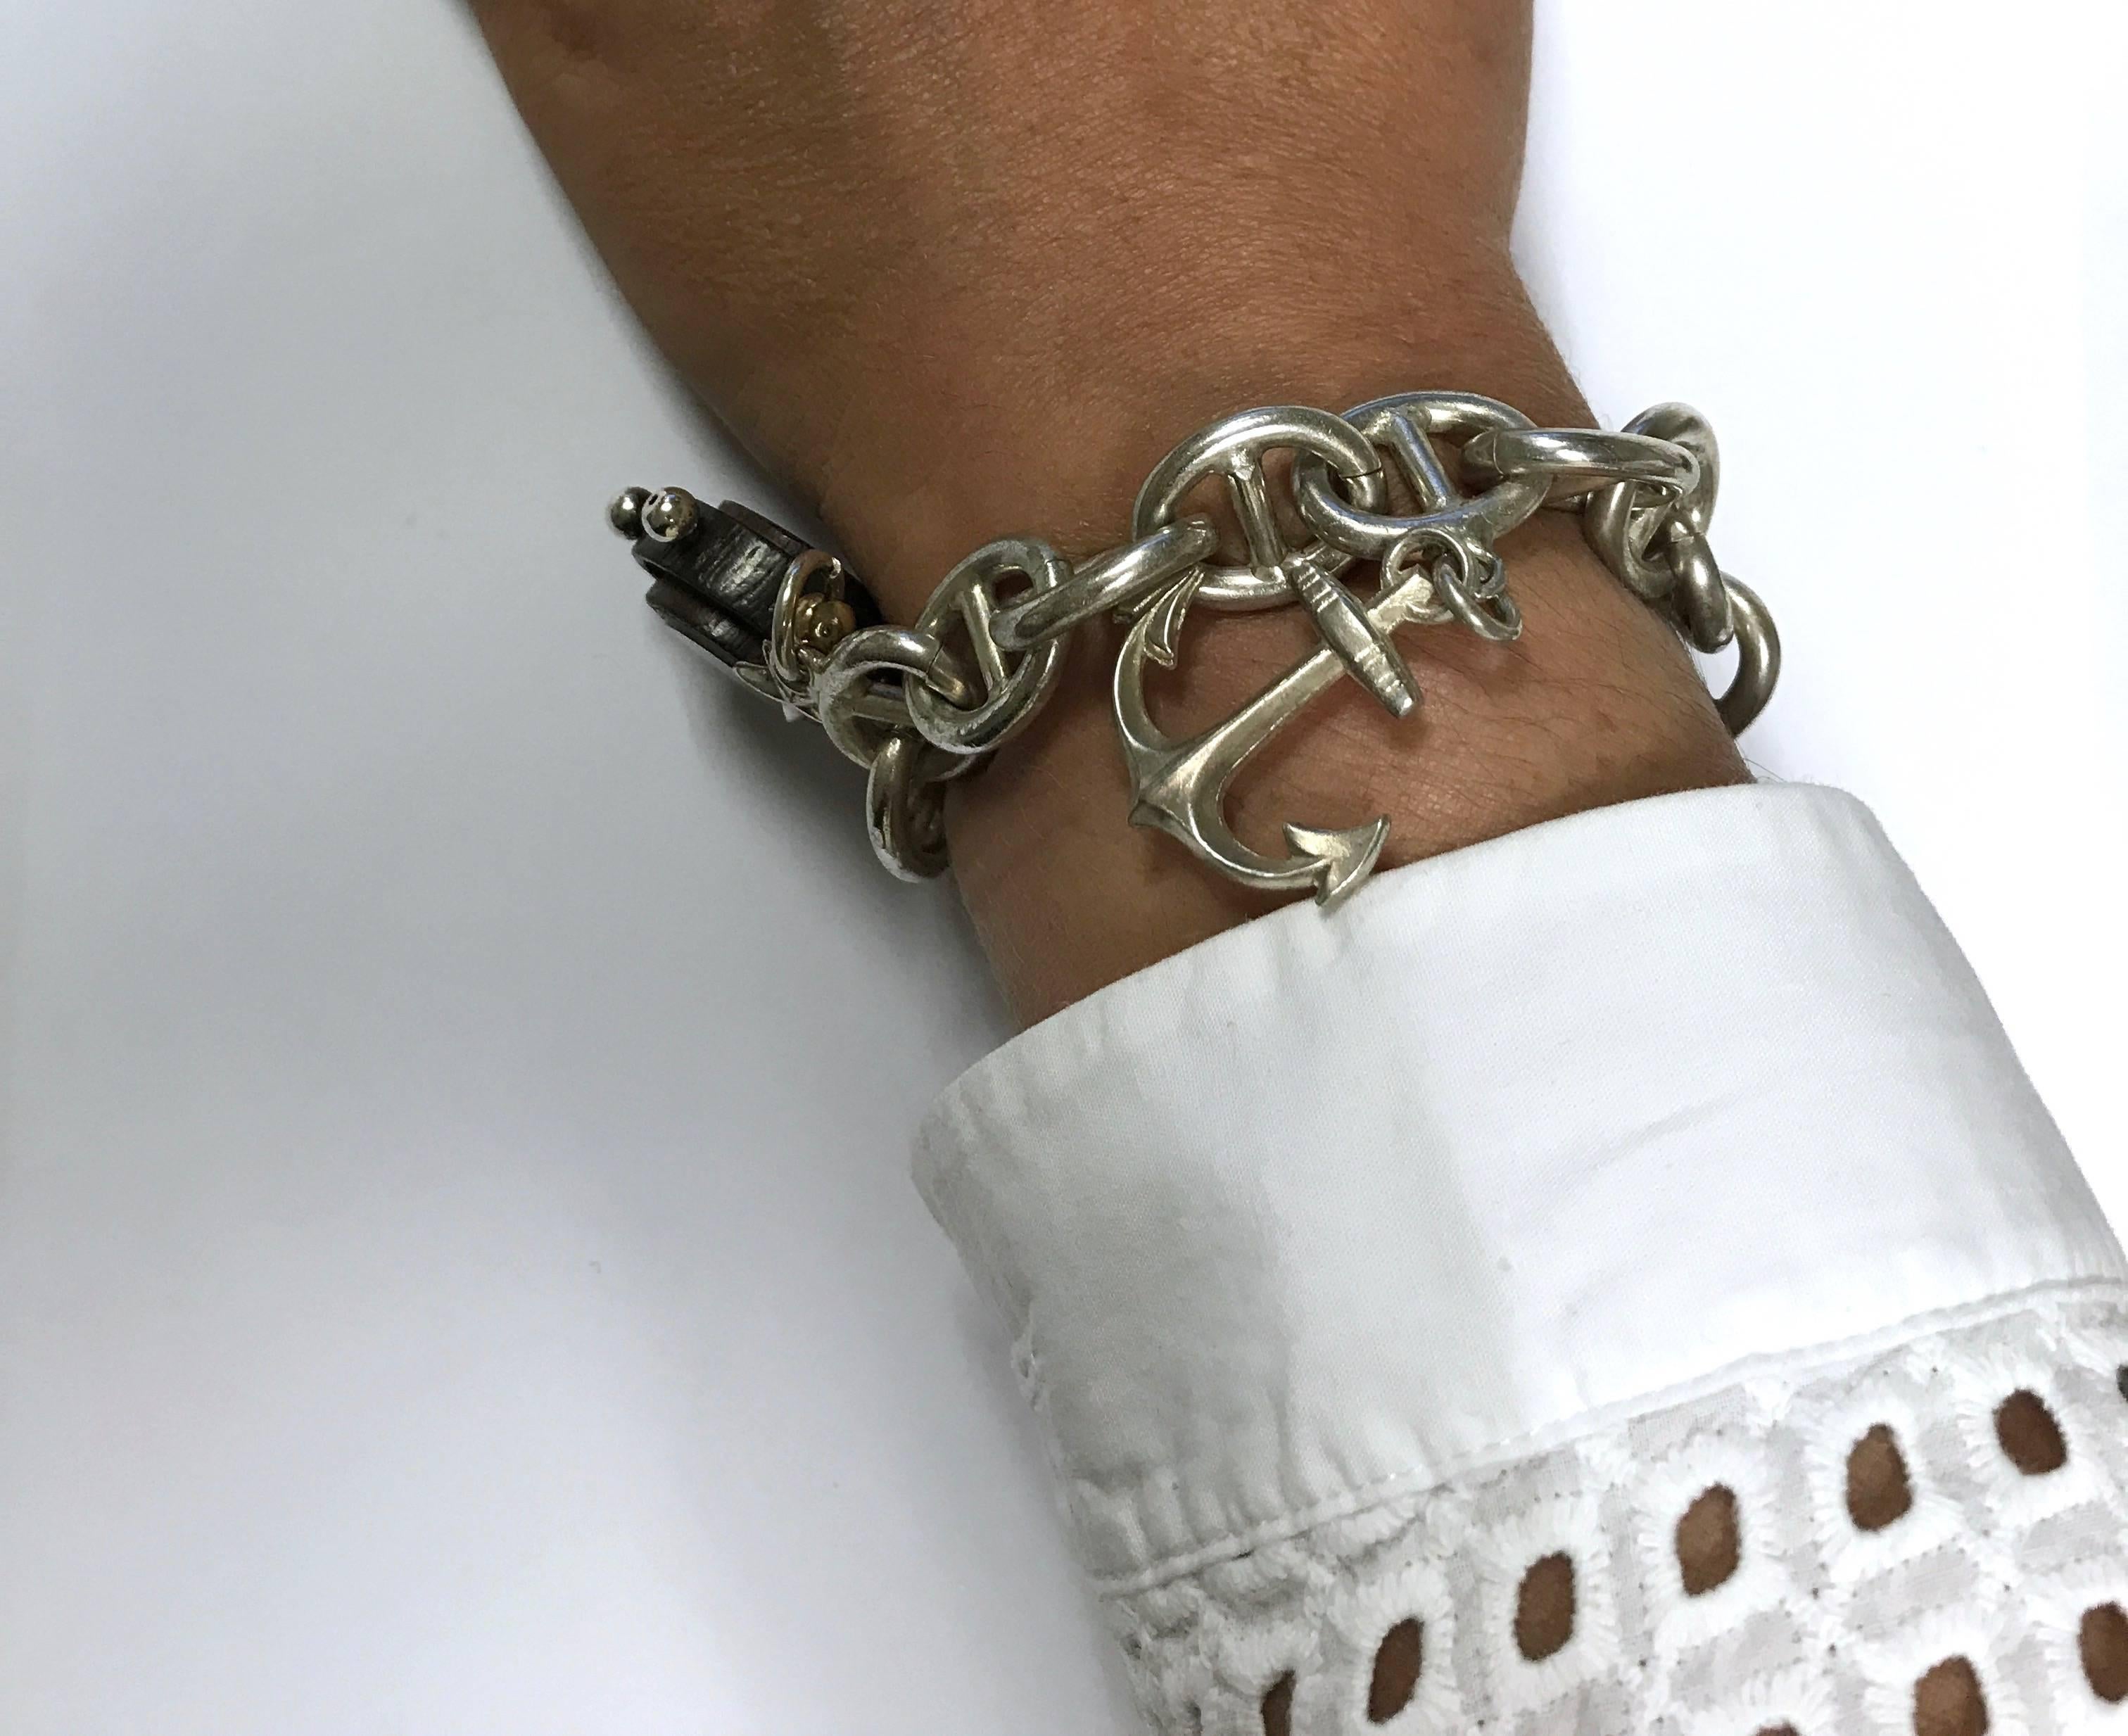 Welcome to Mesure et art du temps, your destination of choice for one-of-a-kind pieces. We are delighted to present this splendid silver chain bracelet, adorned with charms evoking the enchanting atmosphere of the sea air. Each charm tells a story